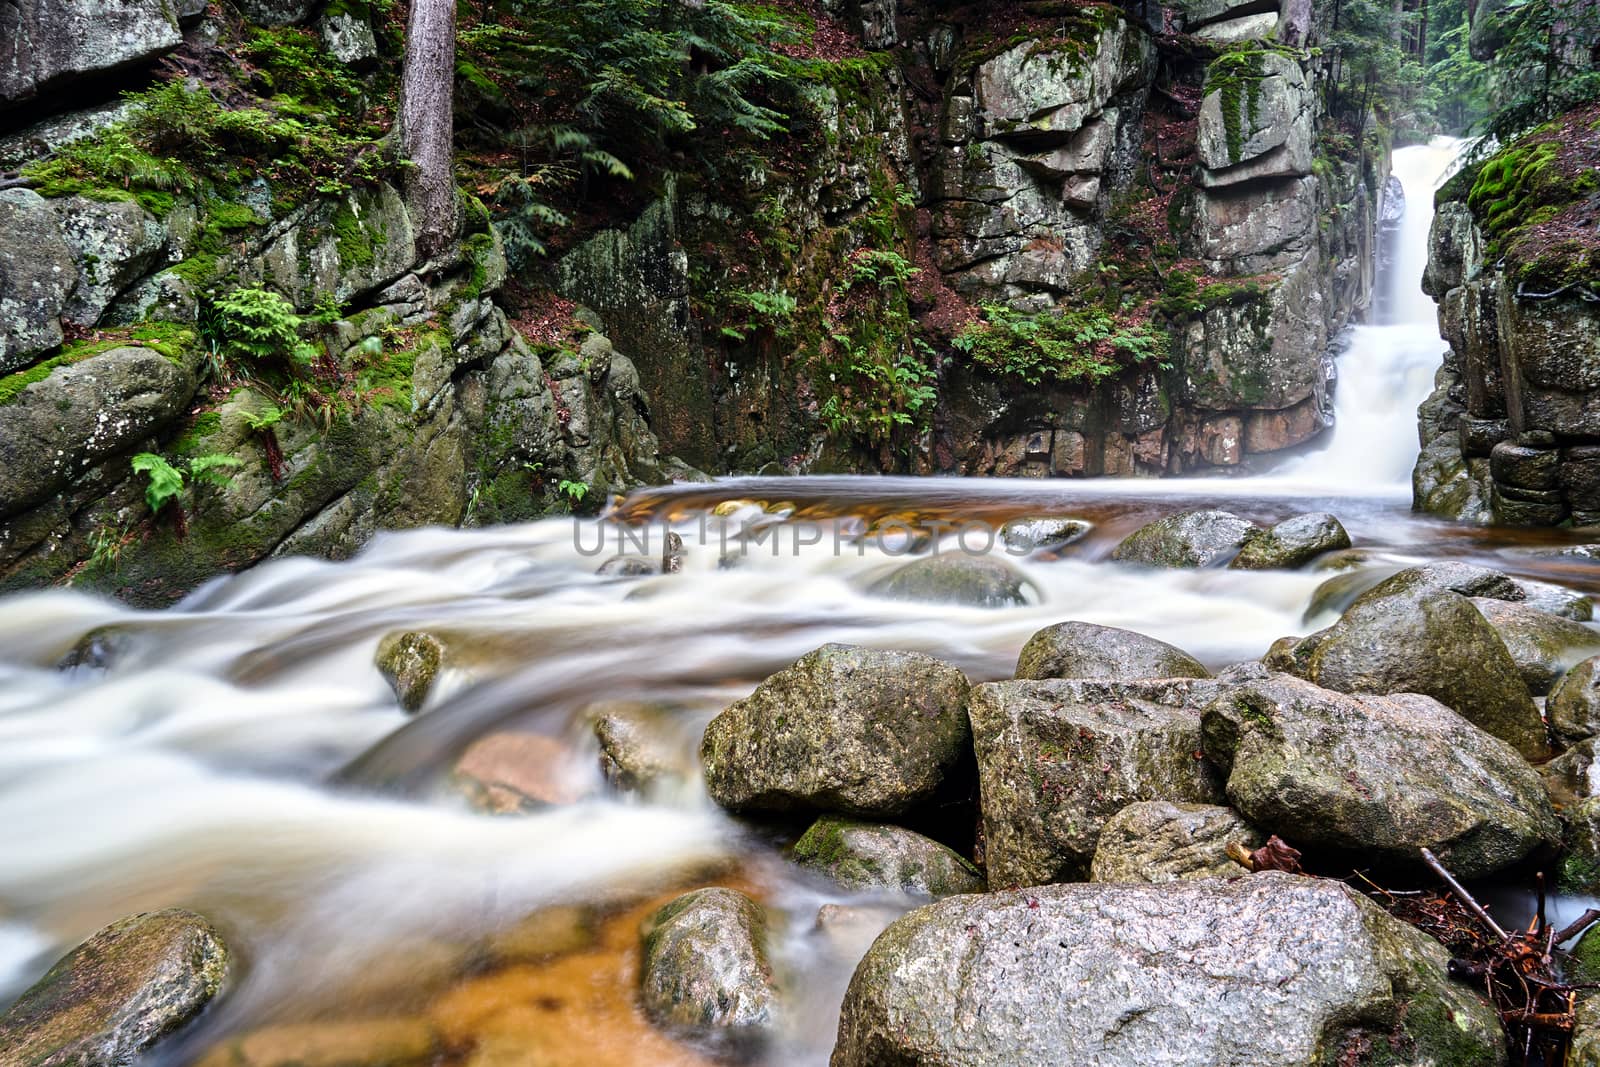 Rocks, boulders and waterfall in the forest in the Giant Mountains in Poland